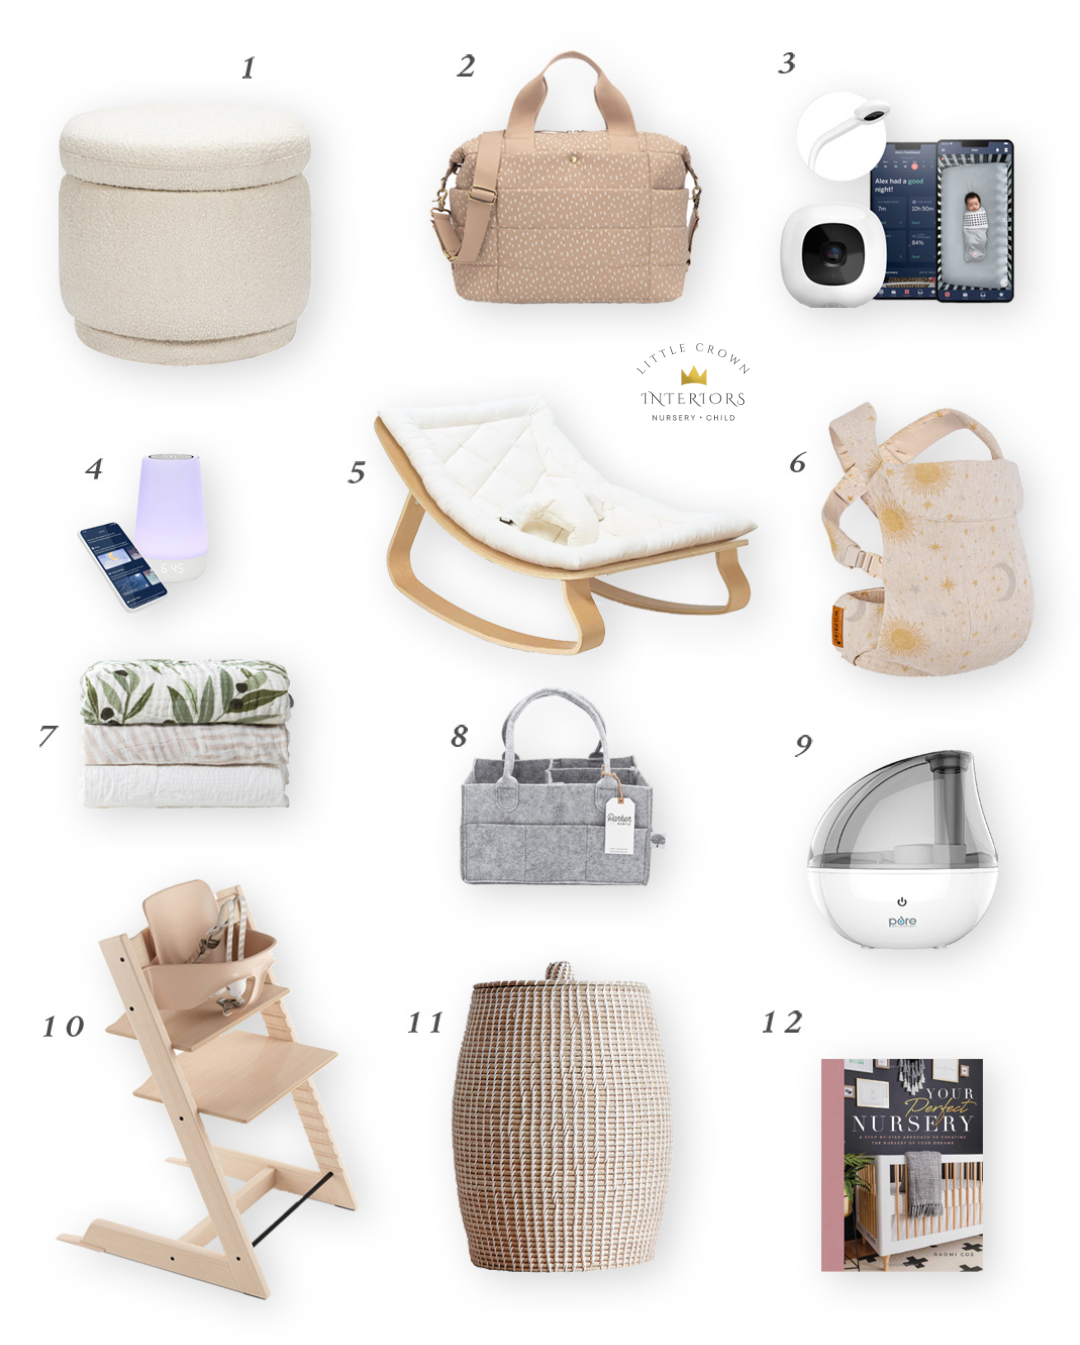 Nursery Baby Registry Products Roundup